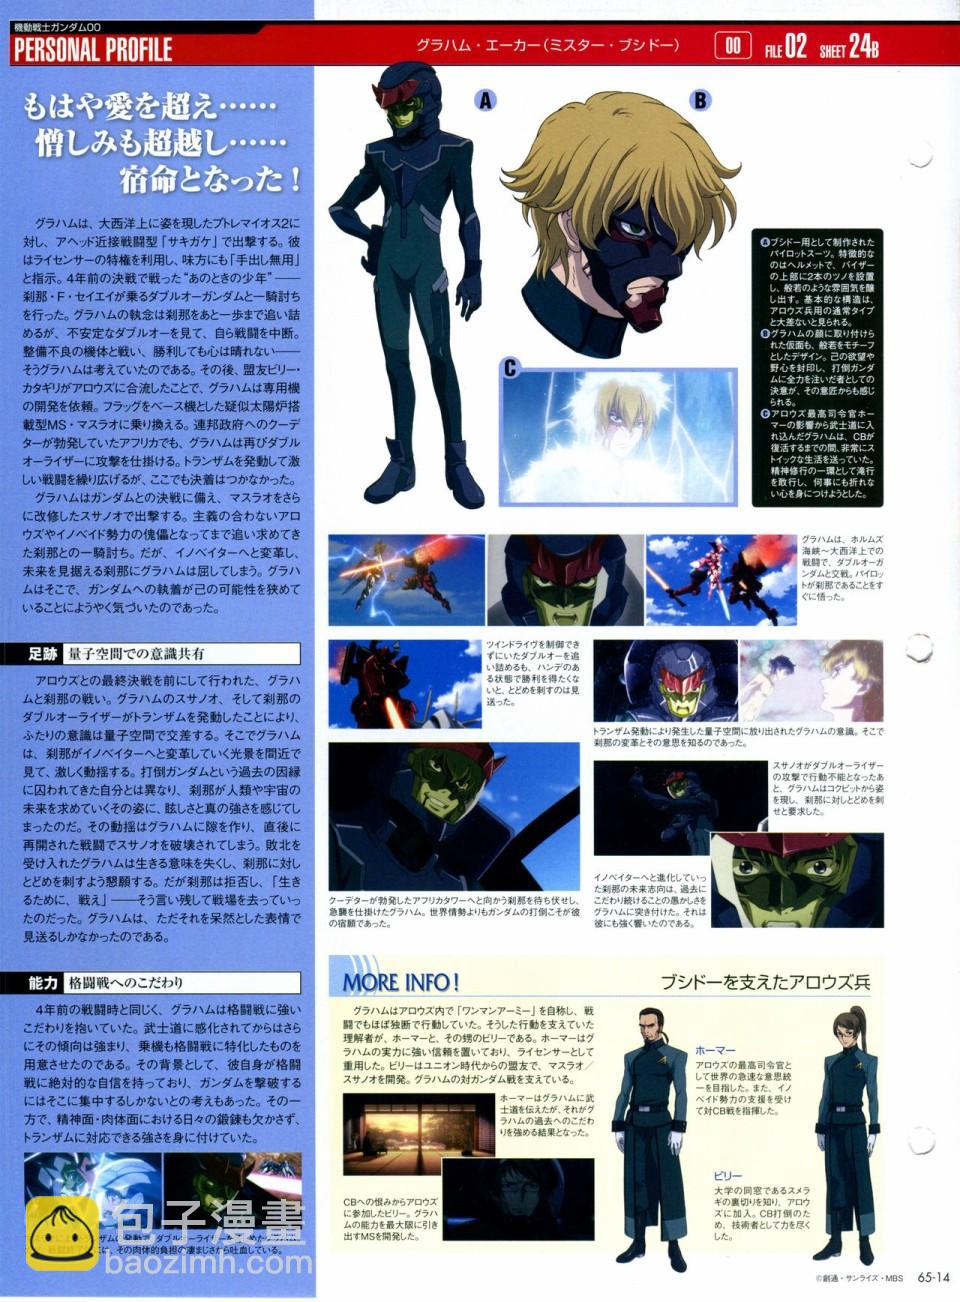 The Official Gundam Perfect File  - 第65-67話(1/3) - 2